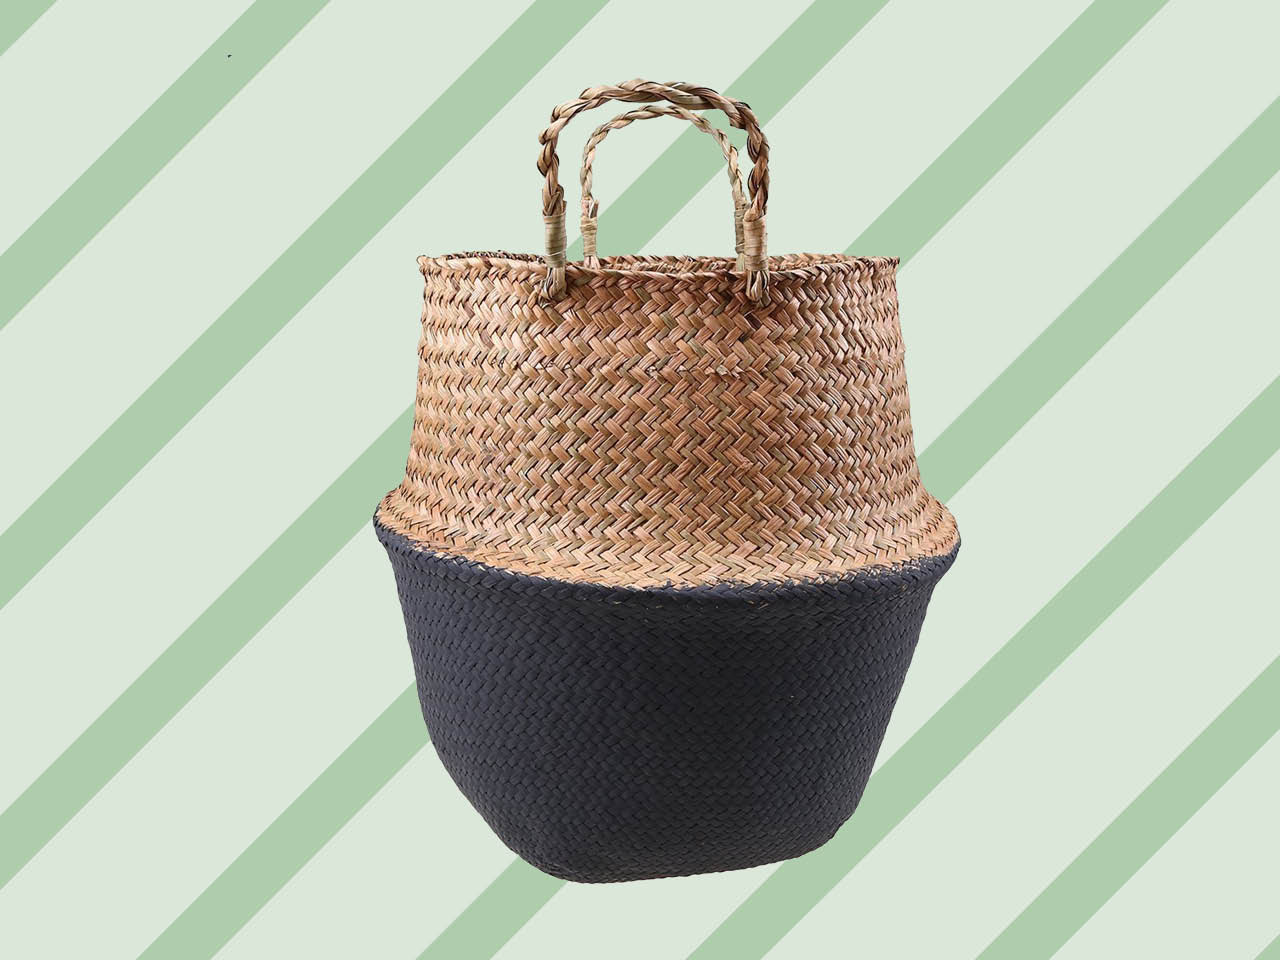 cosy home decor feature image is a seagrass woven basket